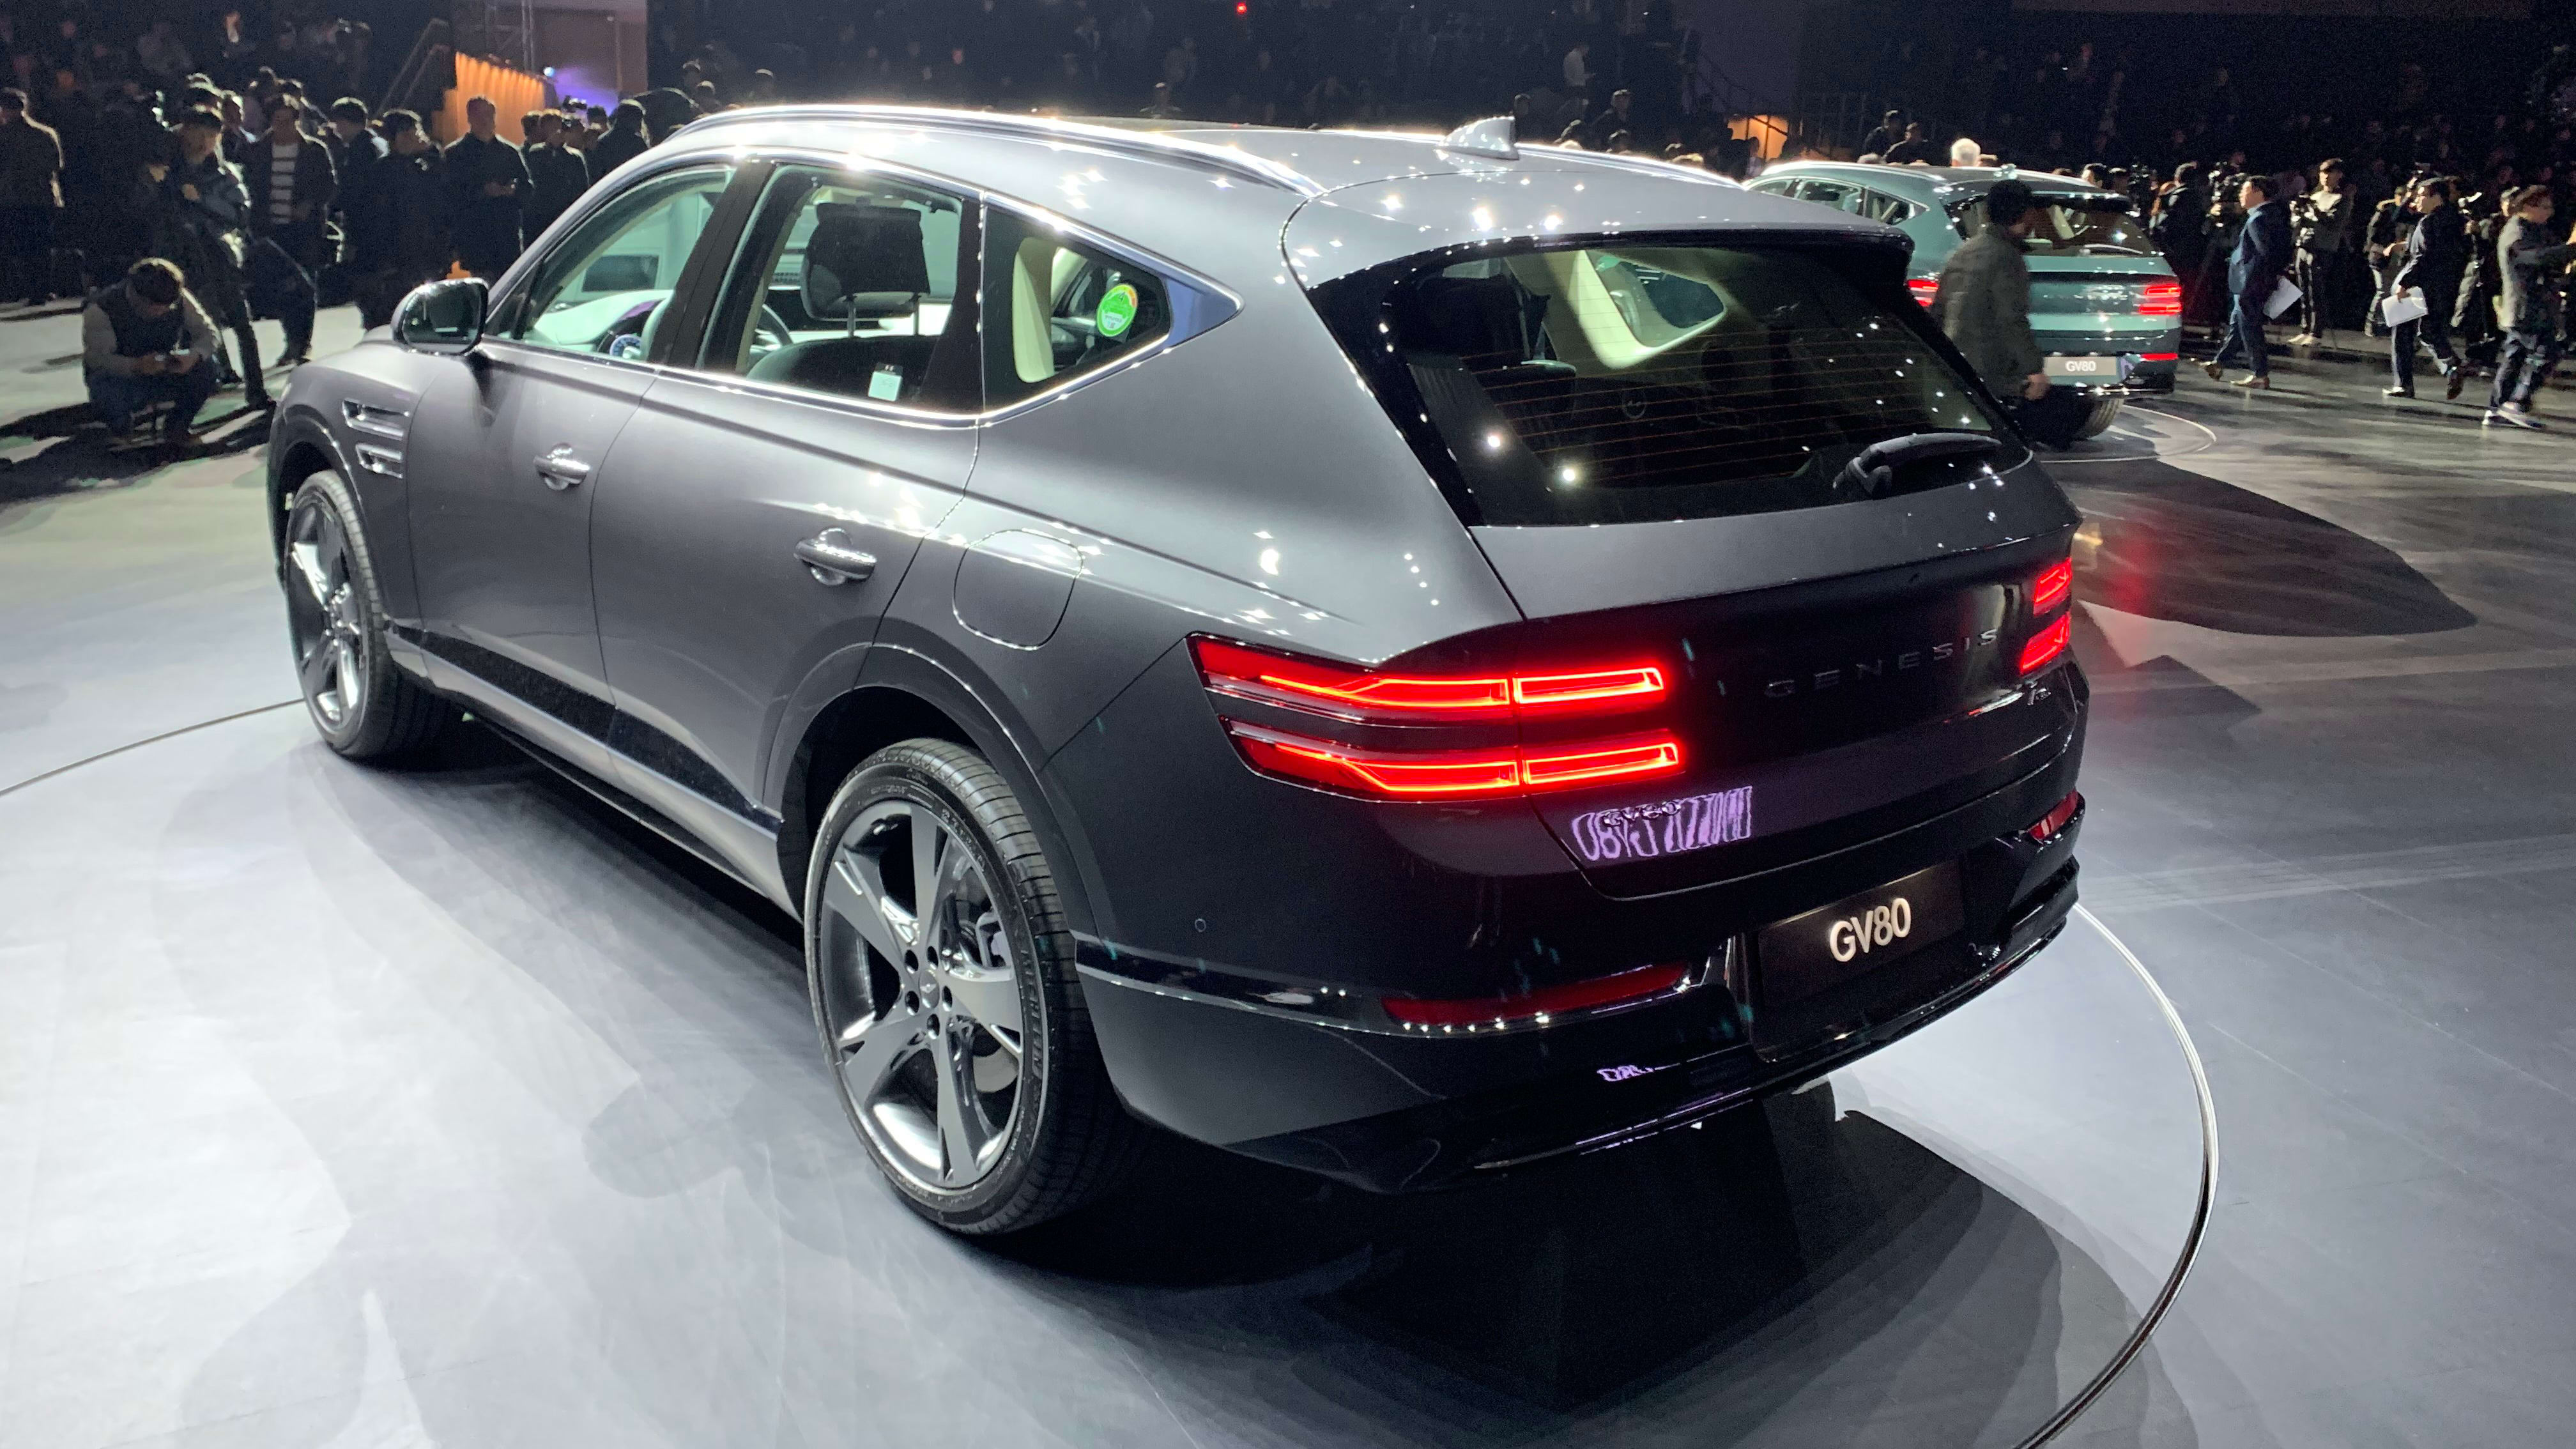 2020 Genesis Gv80 Suv Revealed In Detail Due In Australia Around July Caradvice